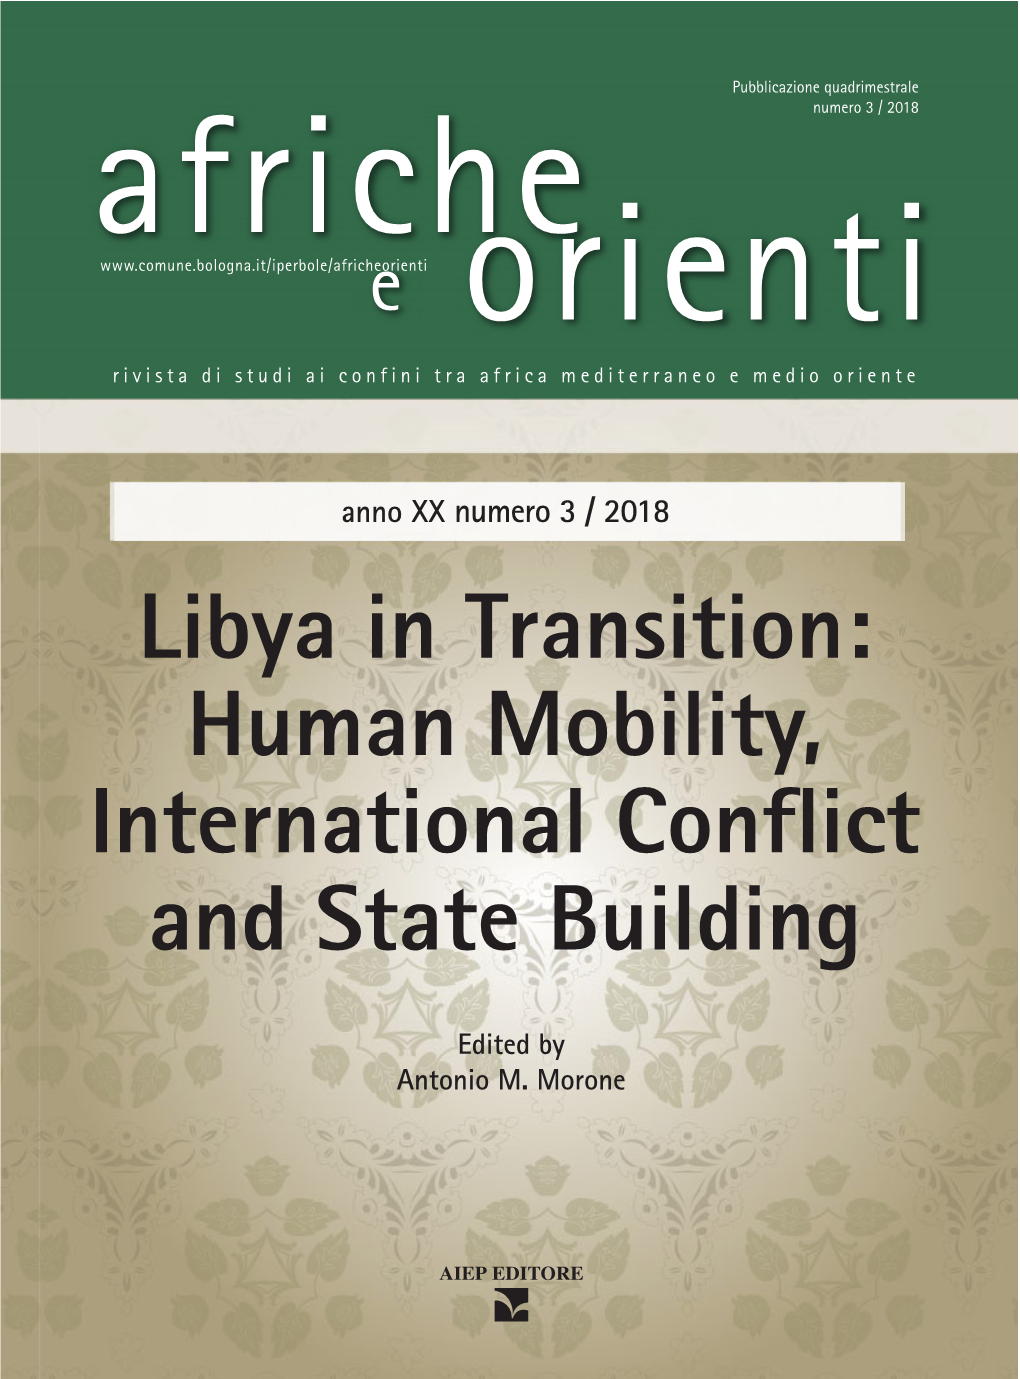 Libya in Transition: Human Mobility, International Conflict and State Building